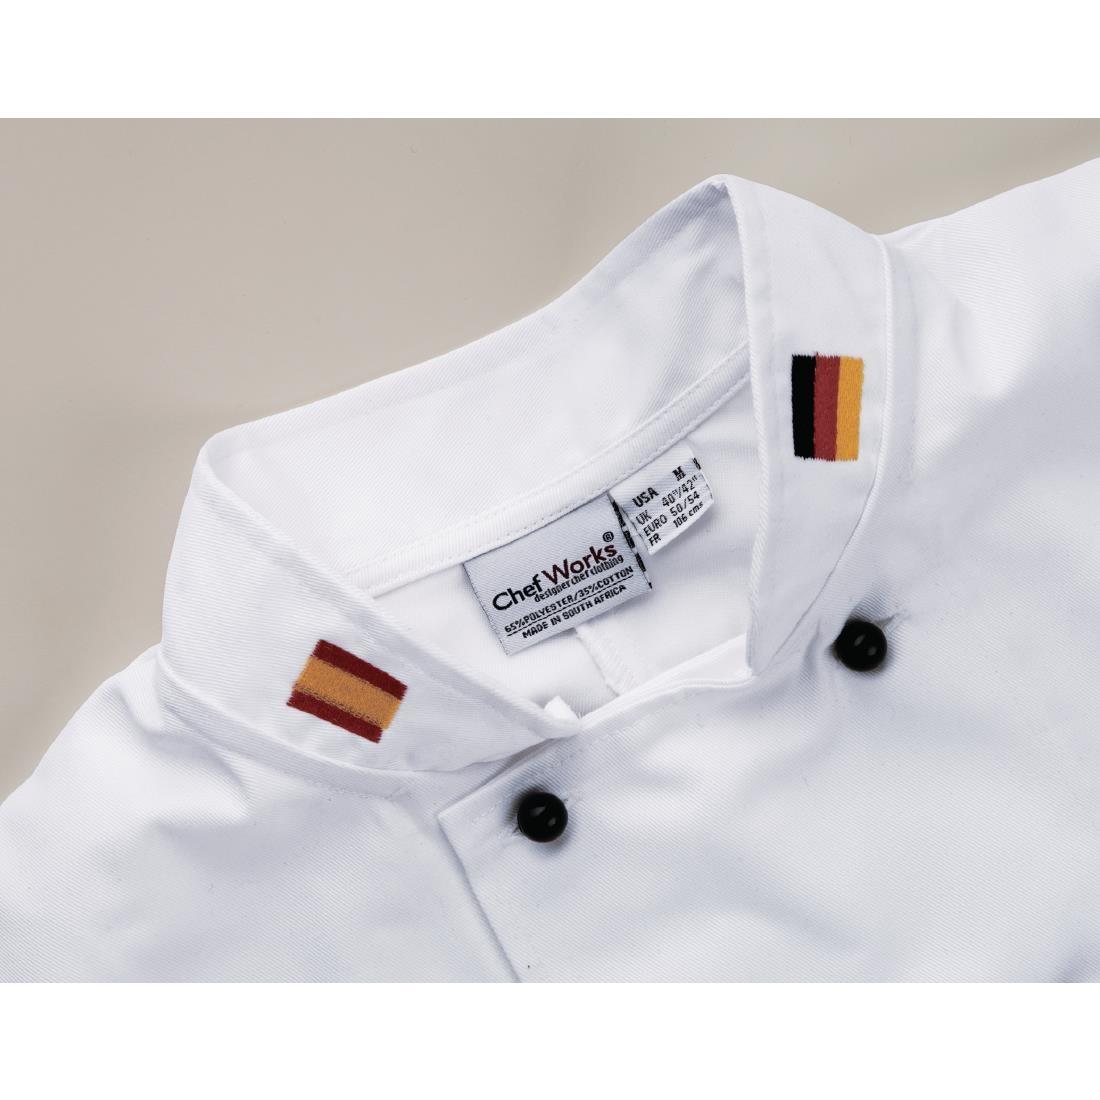 Embroidery Collar Flags - A987-FR  - 1